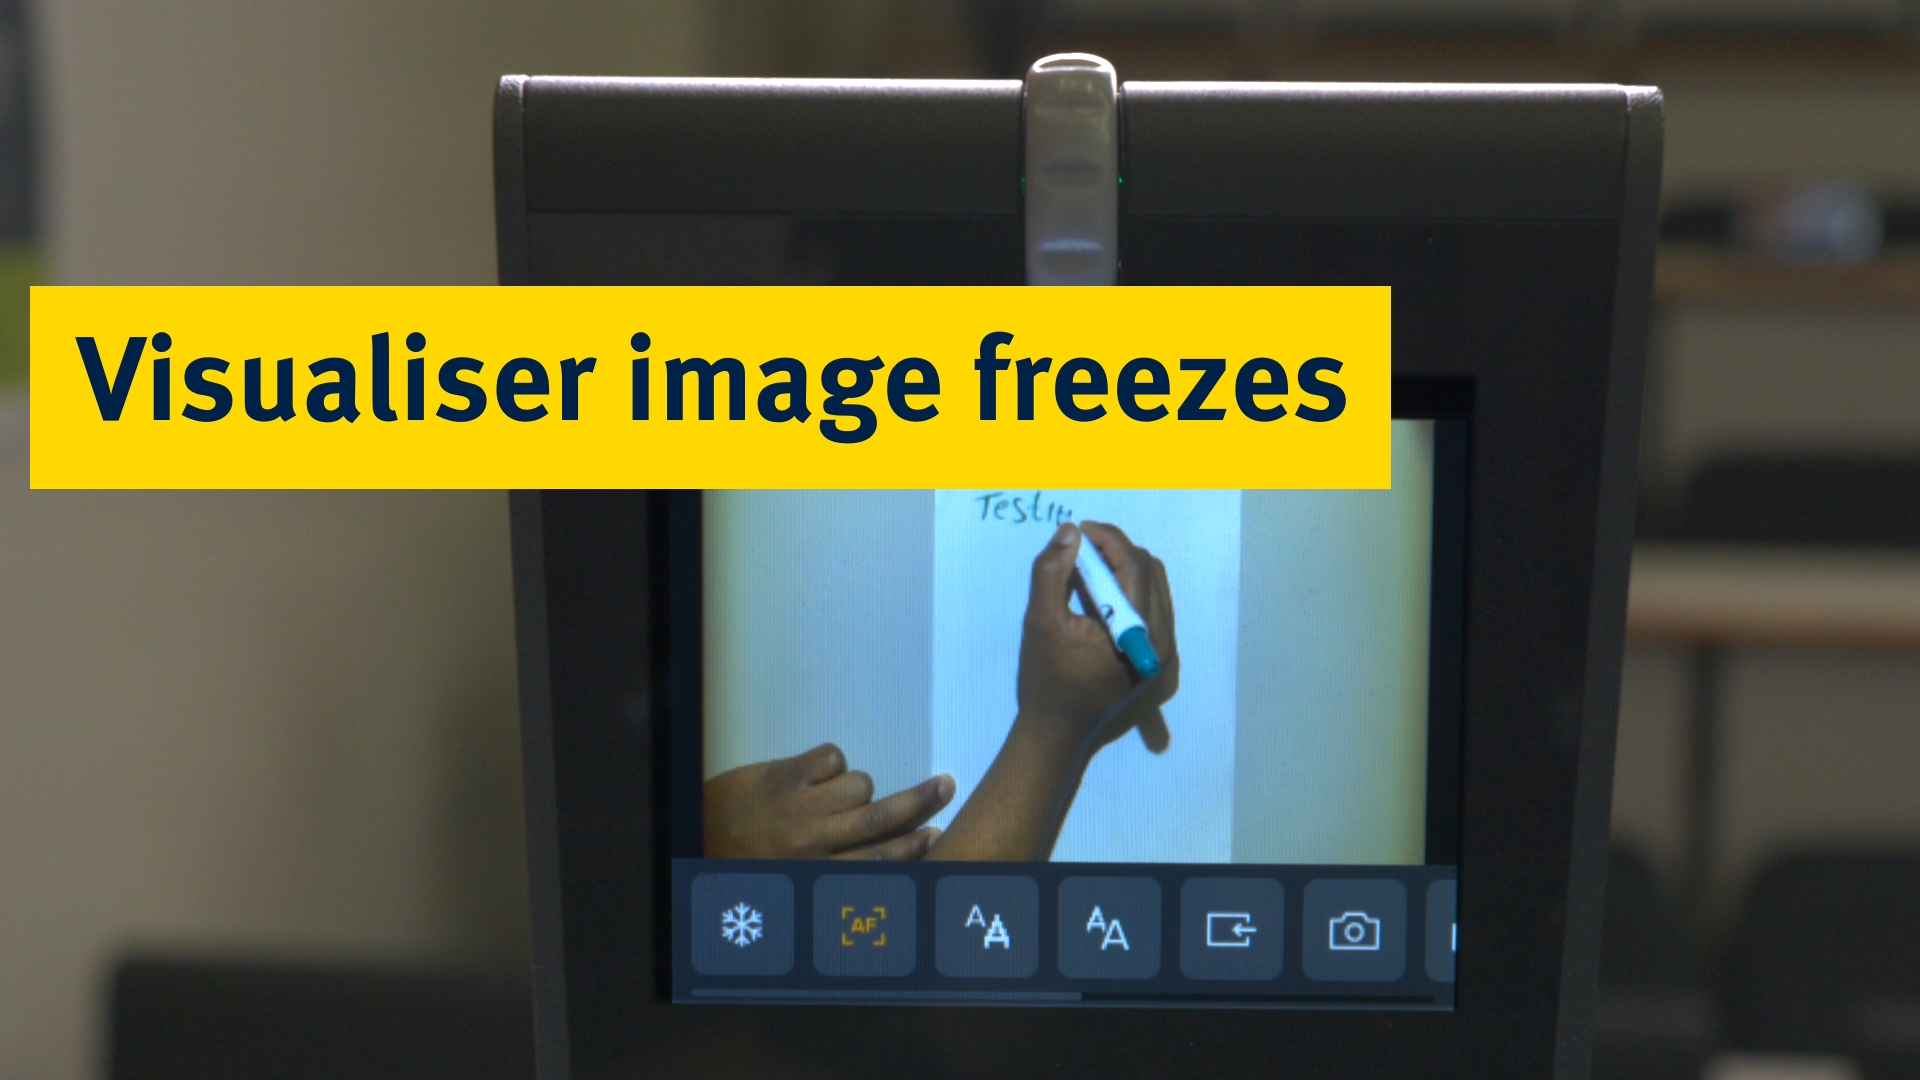 If the image you're displaying from the visualiser is frozen